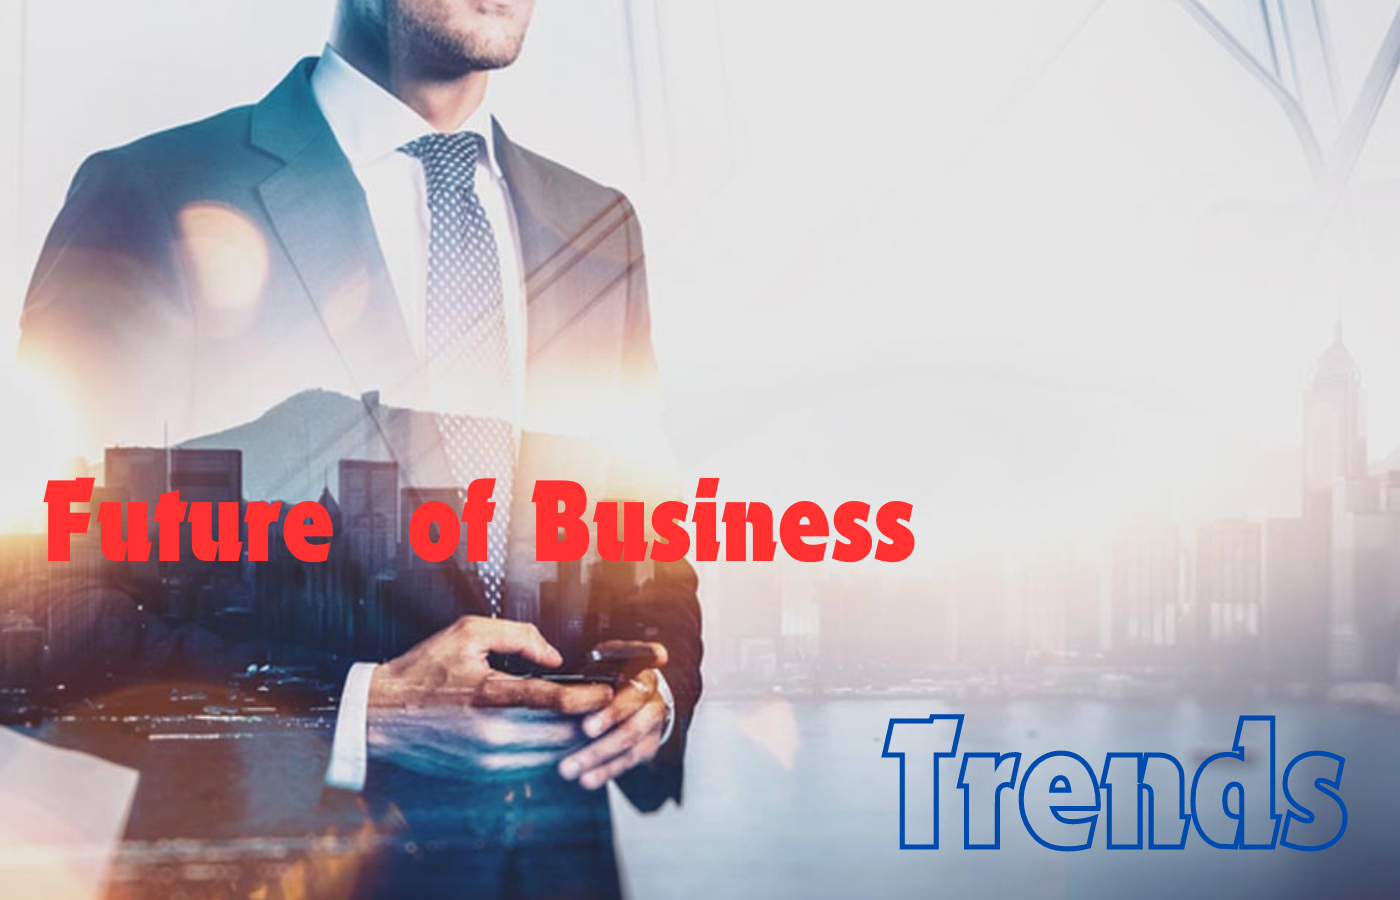 future of business 3 trends